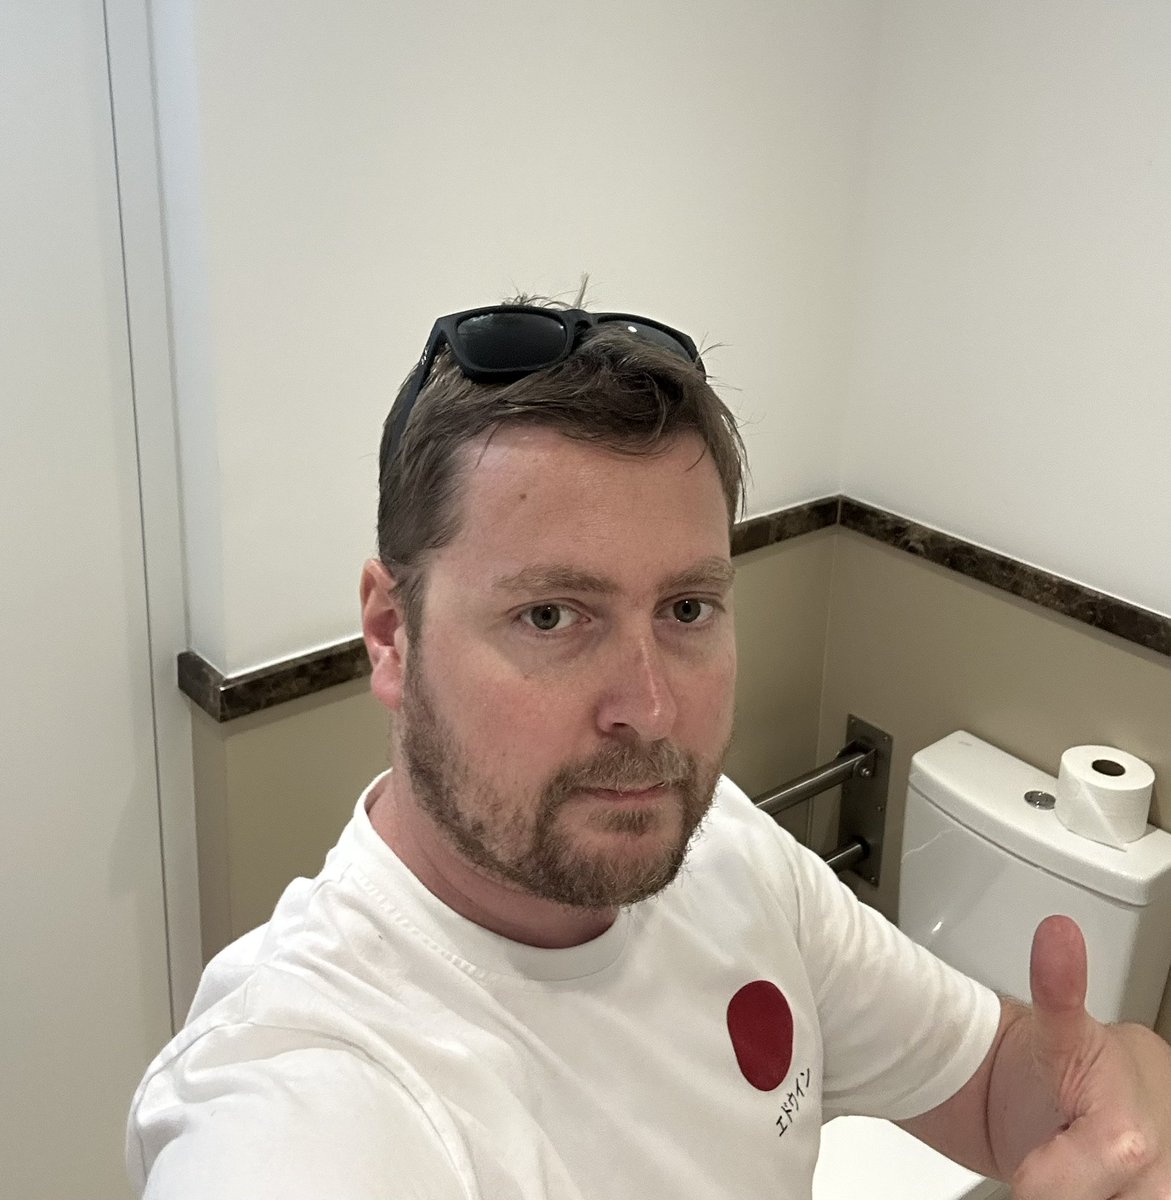 Good afternoon Twitter, On holiday a member of hotel staff has just interrupted me evacuating my bowels by barging into the disabled toilet unannounced (dodgy door lock). I am now, it appears, locked in said disabled toilet (lock remains dodgy). How is your day going?